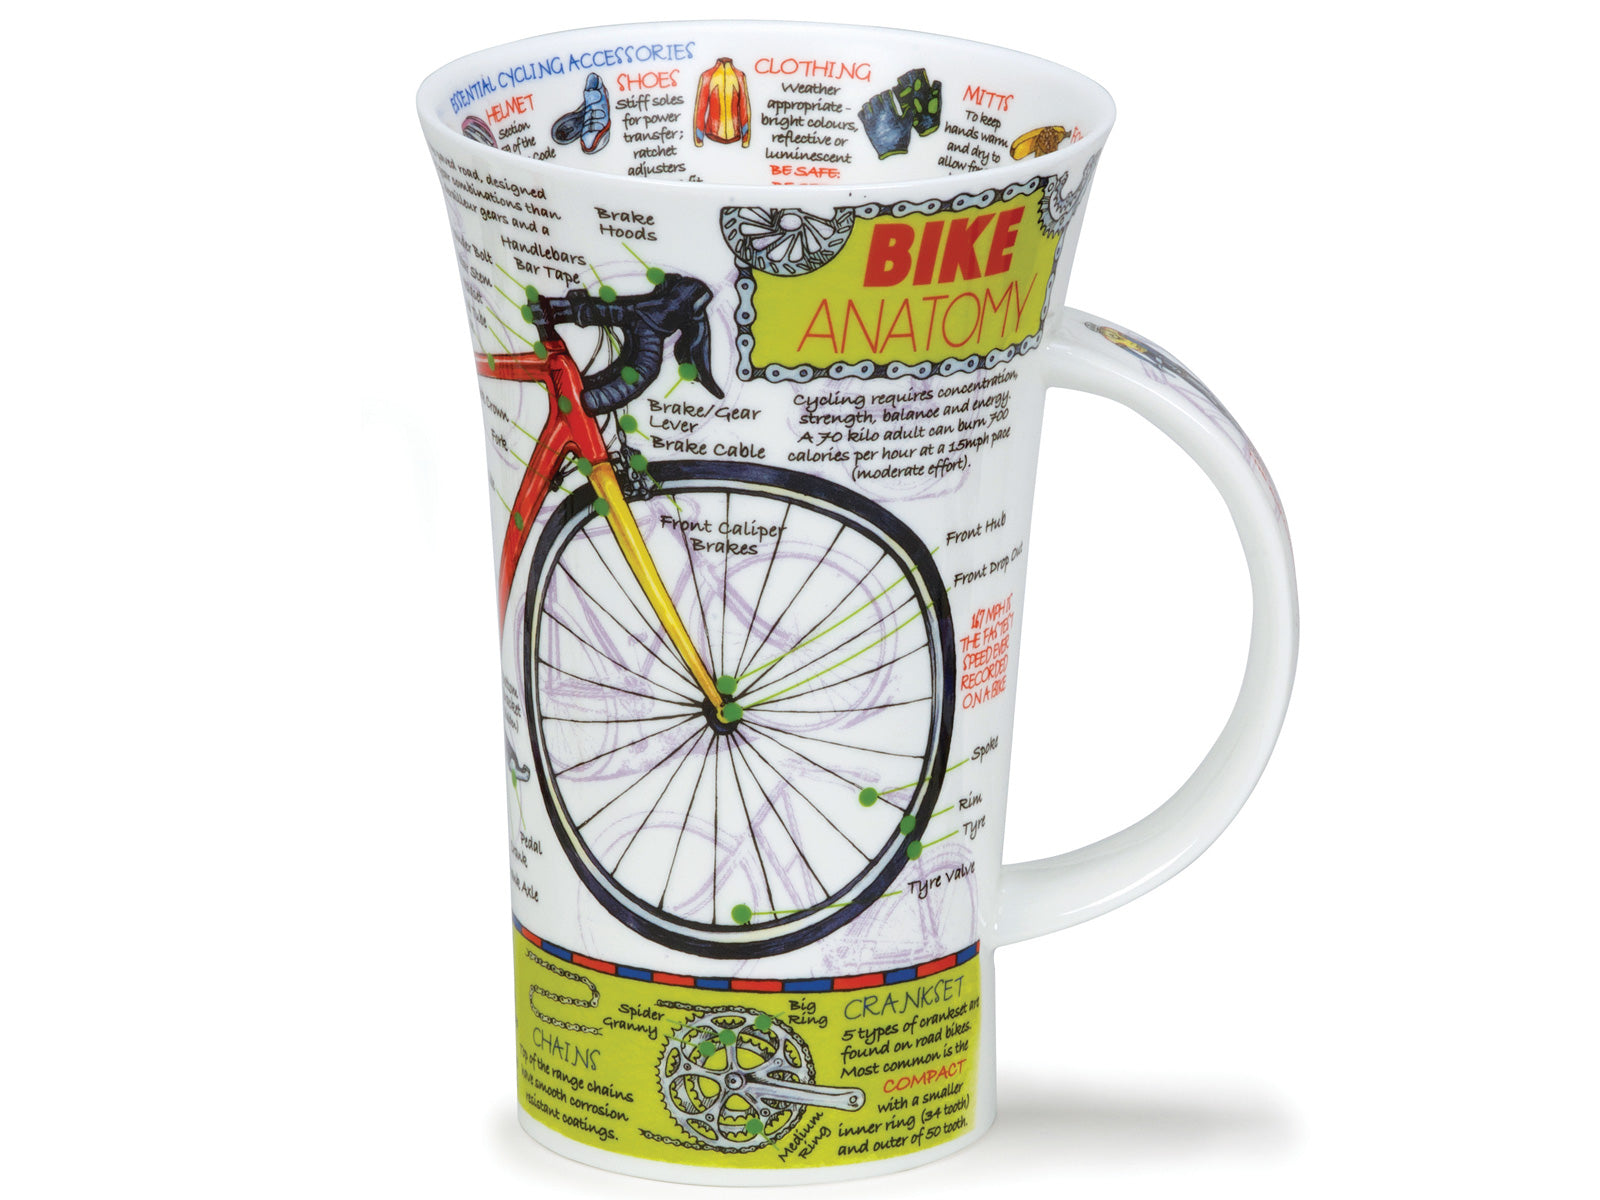 Dunoon Glencoe Bike Anatamy Mug is a large fine bone china mug that is printed with a fully-labelled diagram of the bike around its exterior, along with a set of essential cycling accessories printed around the inner rim of the mug.